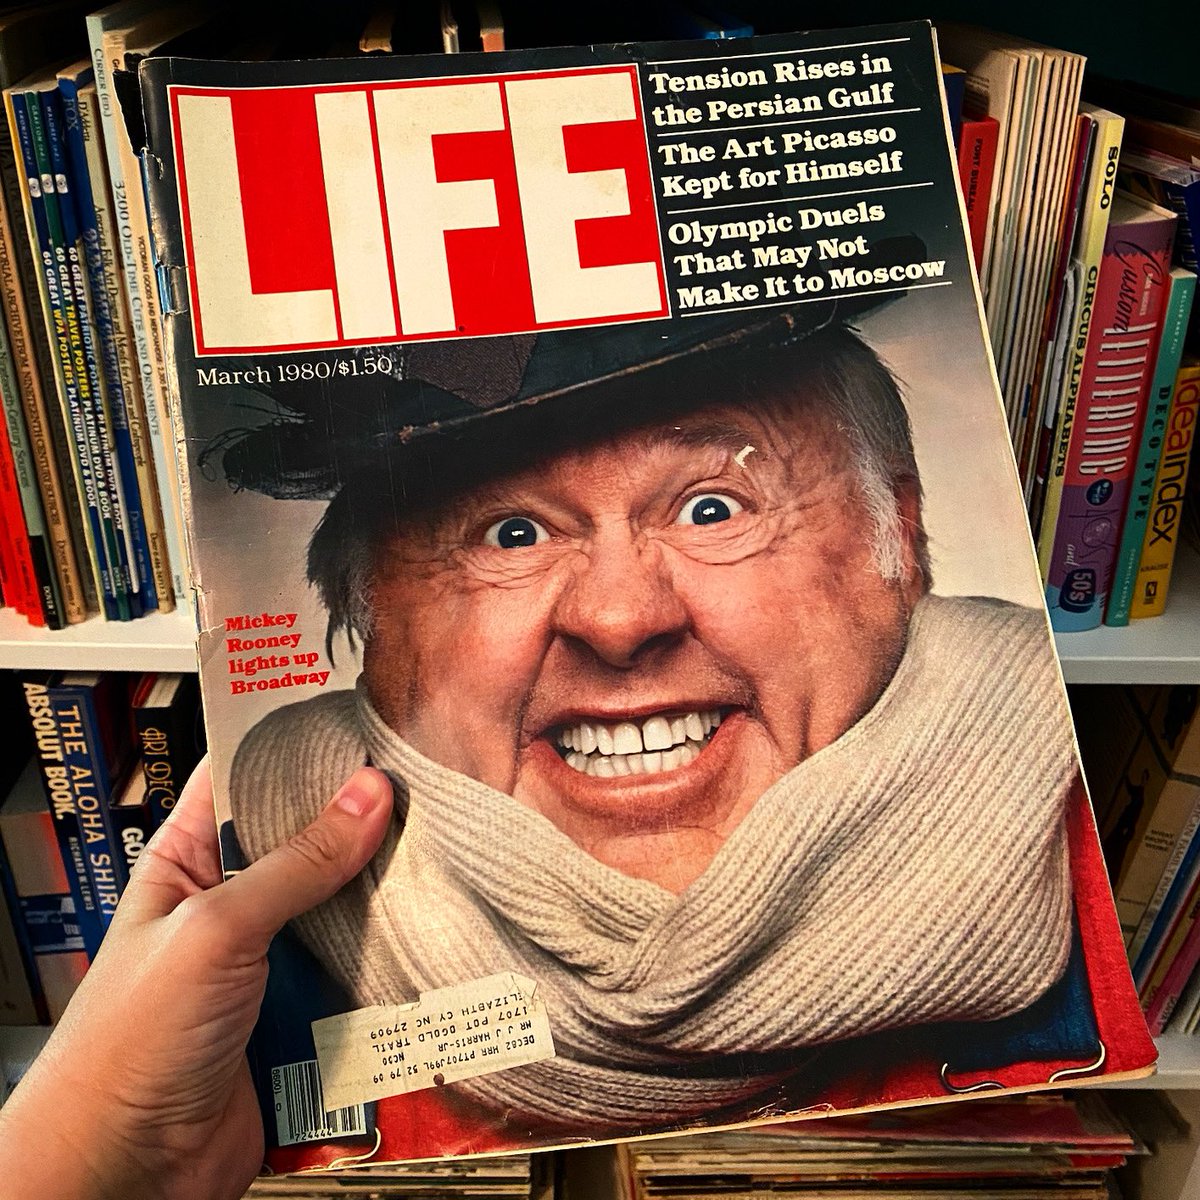 Remembering #MickeyRooney on his birthday.

In a 9-decade film & stage career, Rooney had one of his biggest successes in the #Broadway show #SugarBabies opposite #AnnMiller. I found this issue of LIFE promoting the show while antiquing last year.

#TCMParty #BOTD #BornOnThisDay